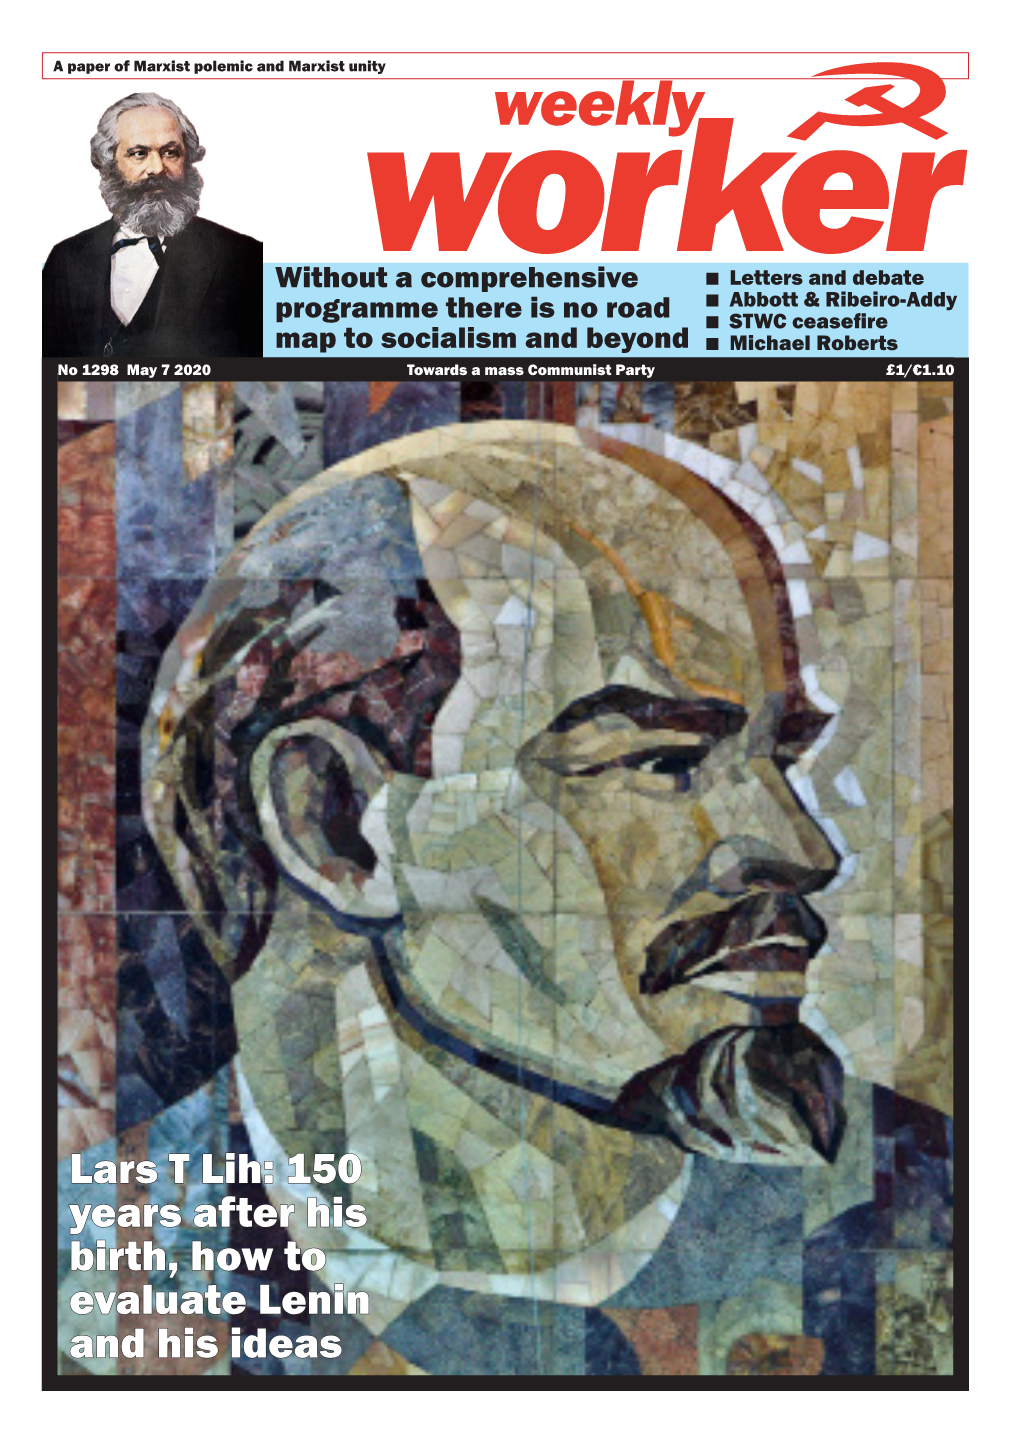 Lars T Lih: 150 Years After His Birth, How to Evaluate Lenin and His Ideas Weekly 2 May 7 2020 1298 Worker LETTERS